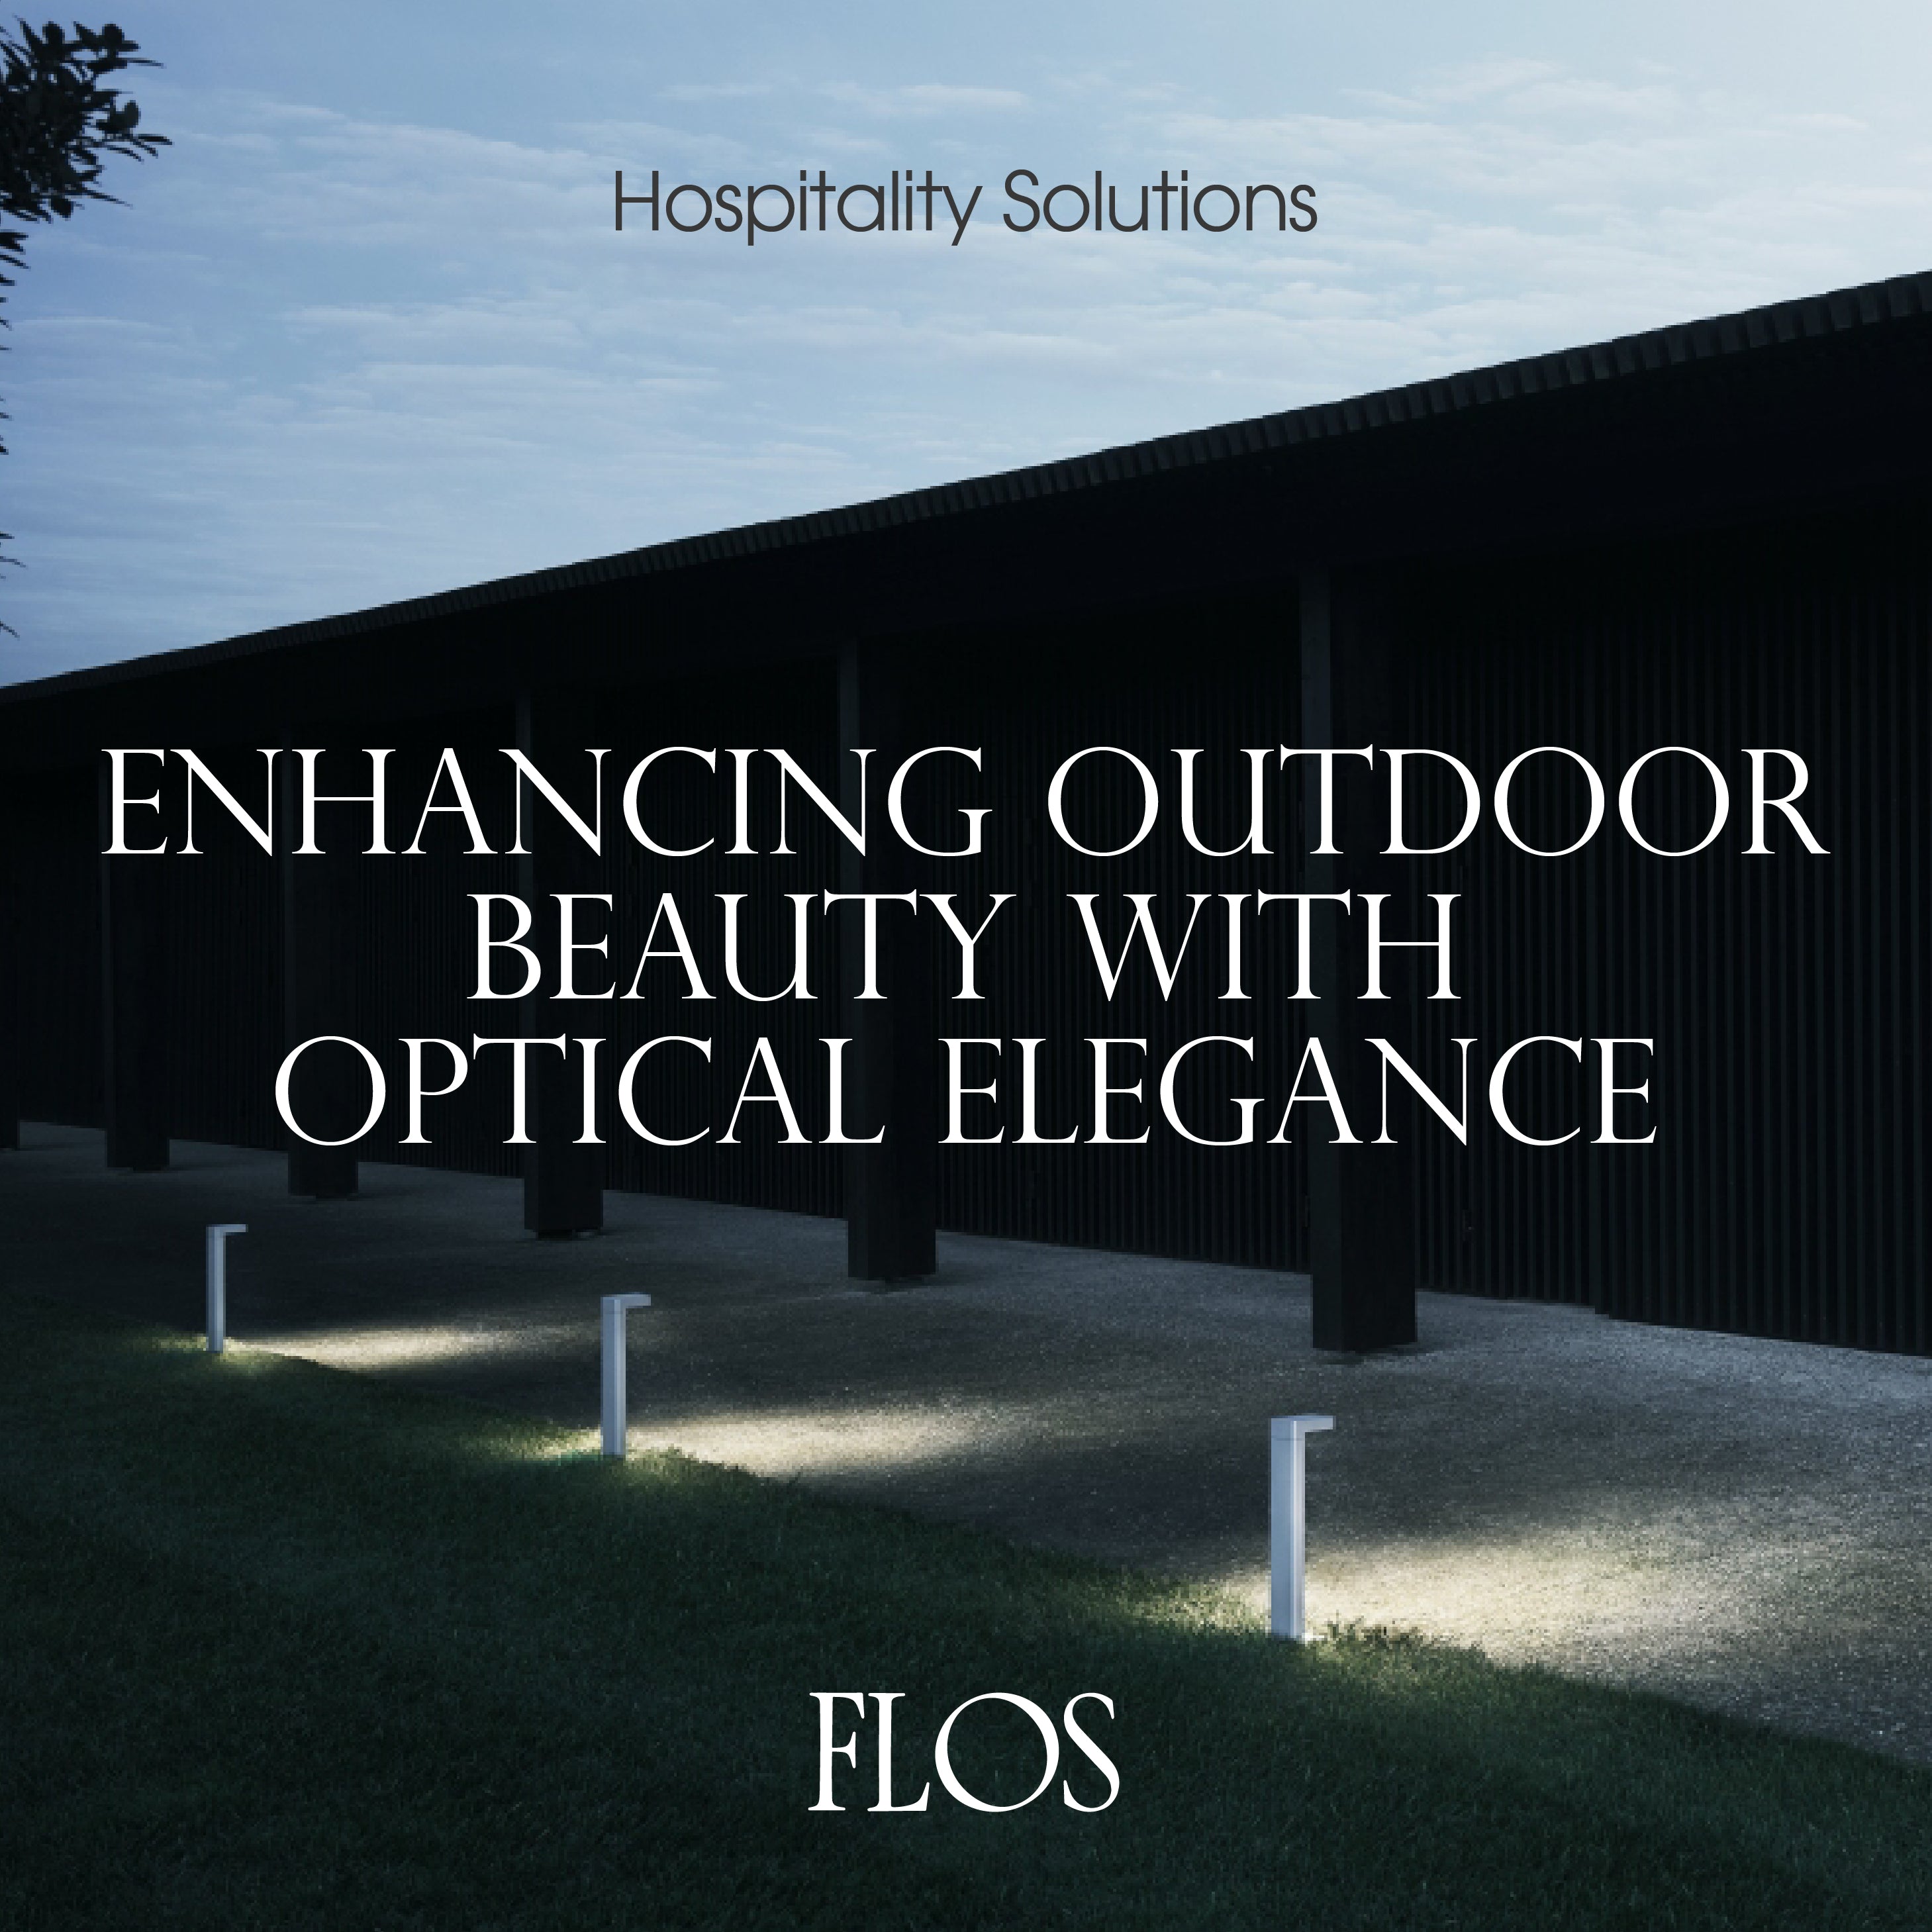 COLOURLIVING | HOSPITALITY SOLUTIONS | ENHANCING OUTDOOR BEAUTY WITH OPTICAL ELEGANCE